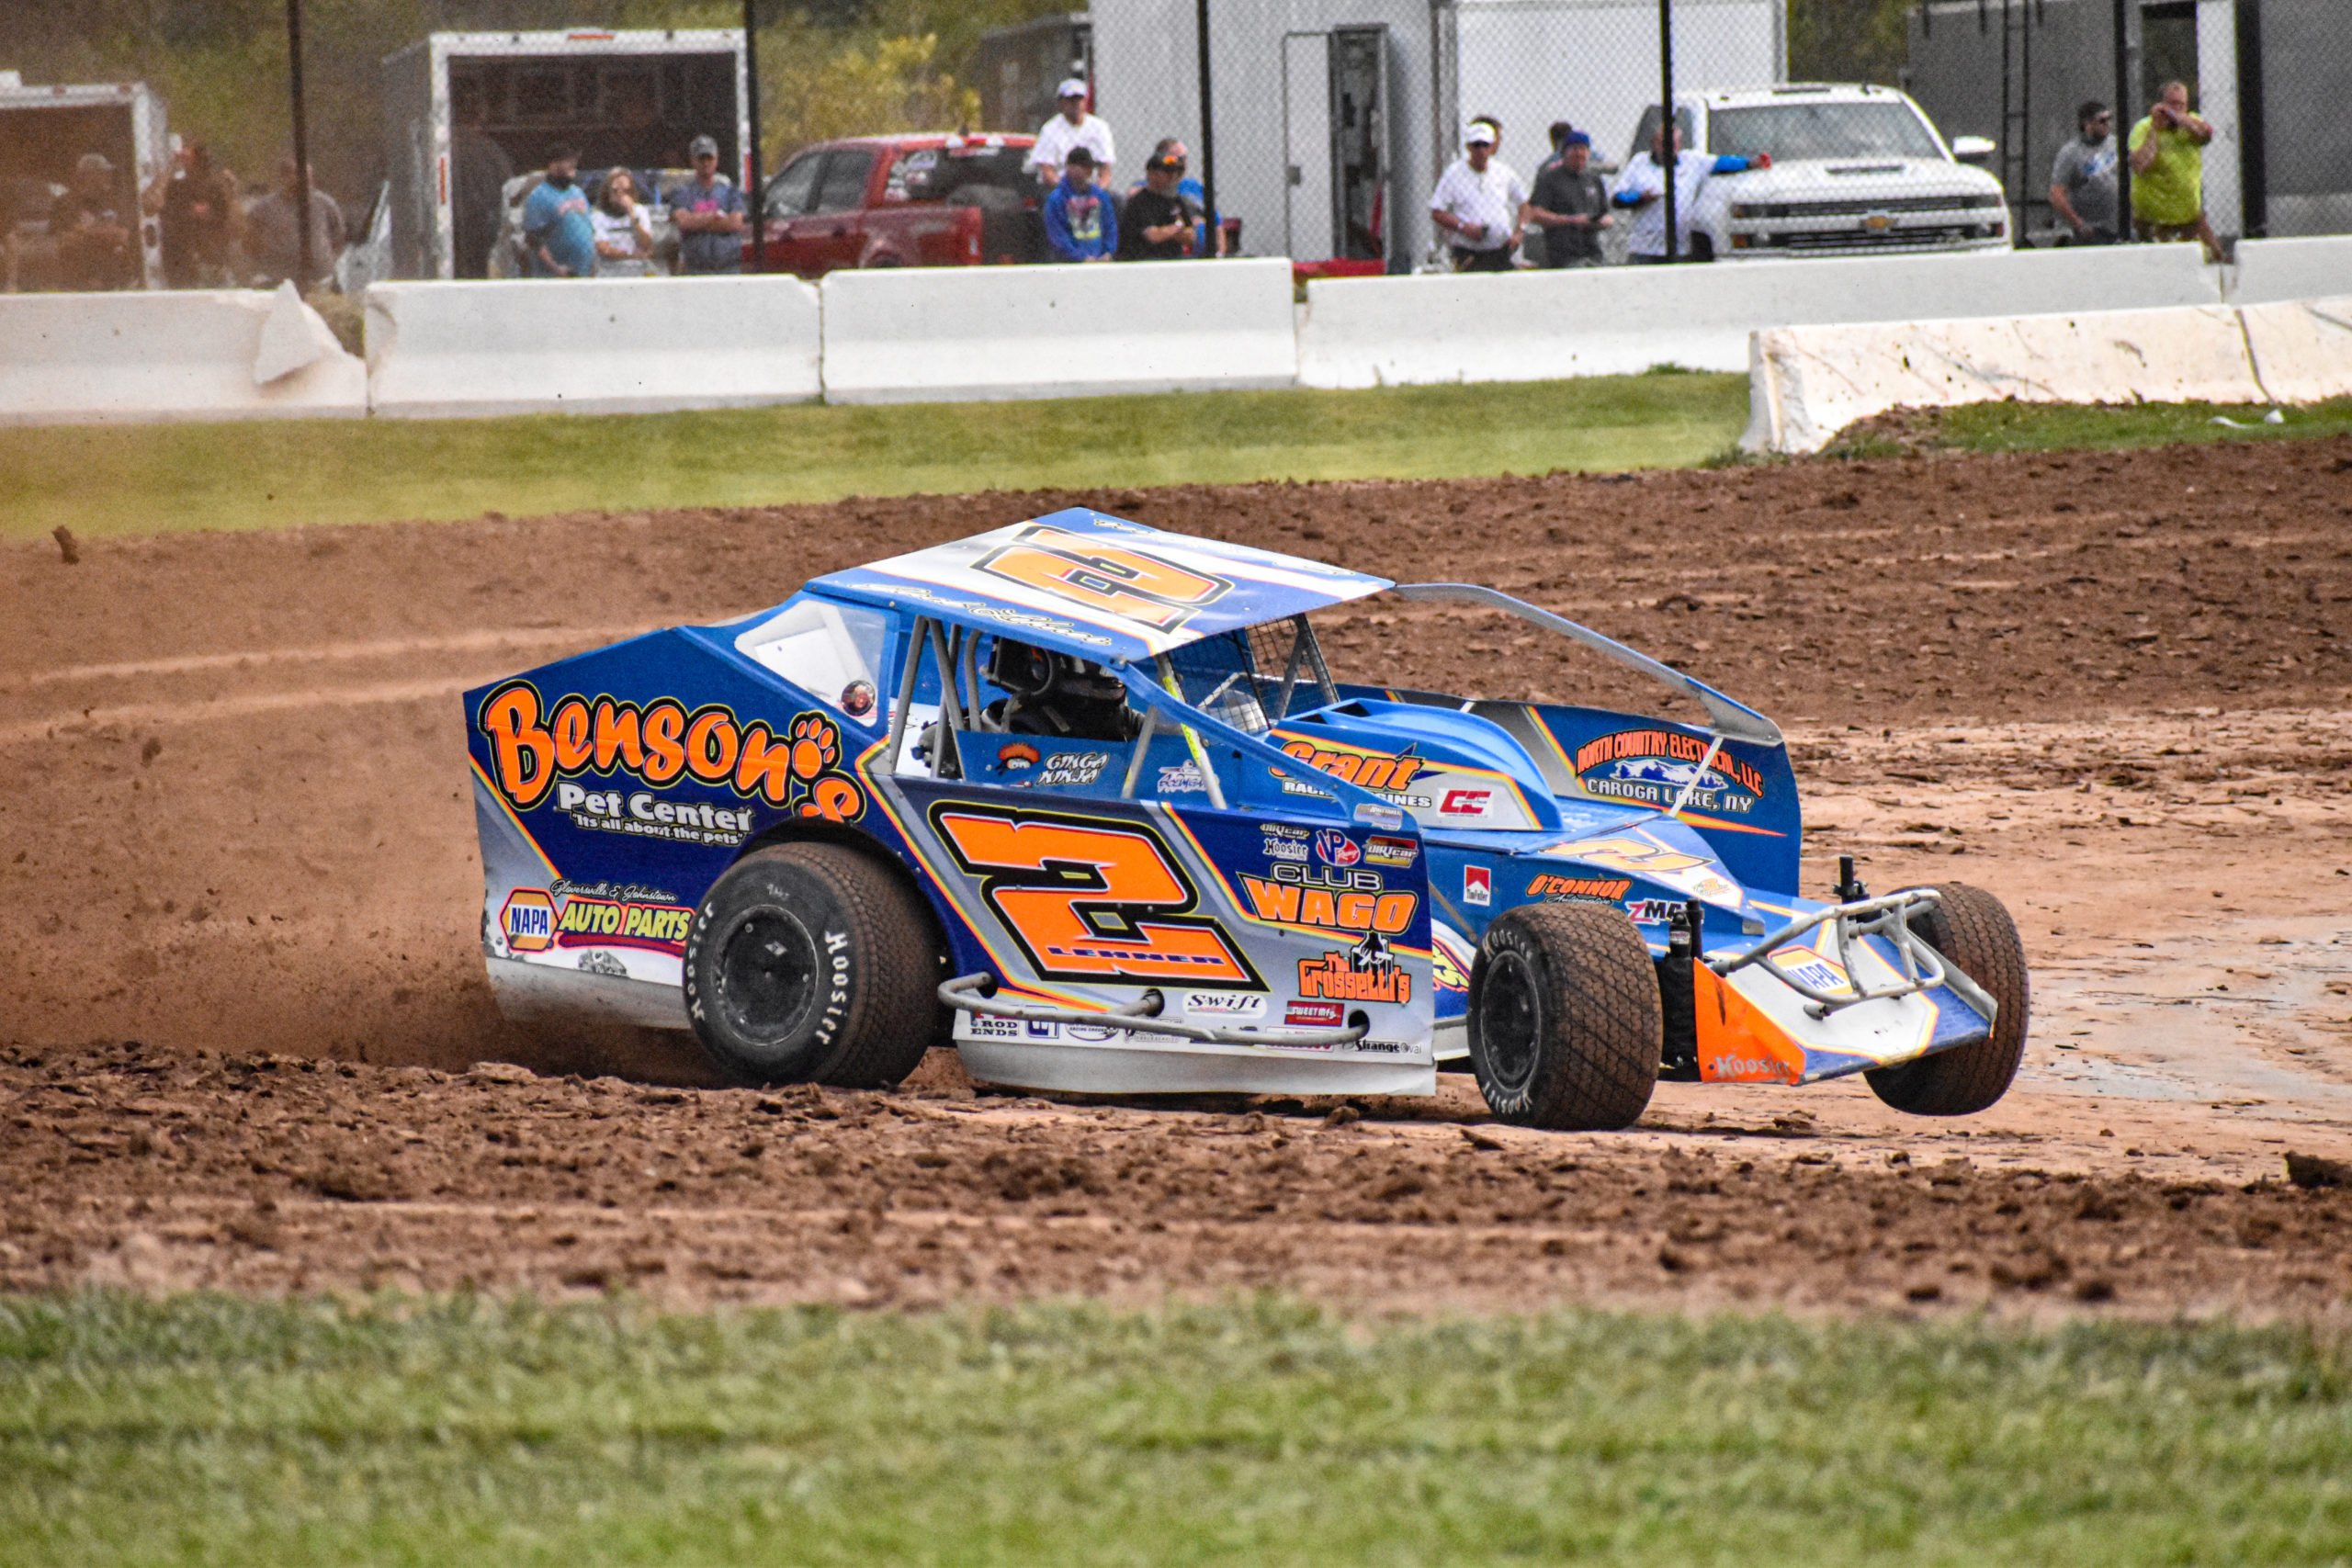 Historic 2021 Schedule Takes Super DIRTcar Series Big Block Modifieds to New Heights